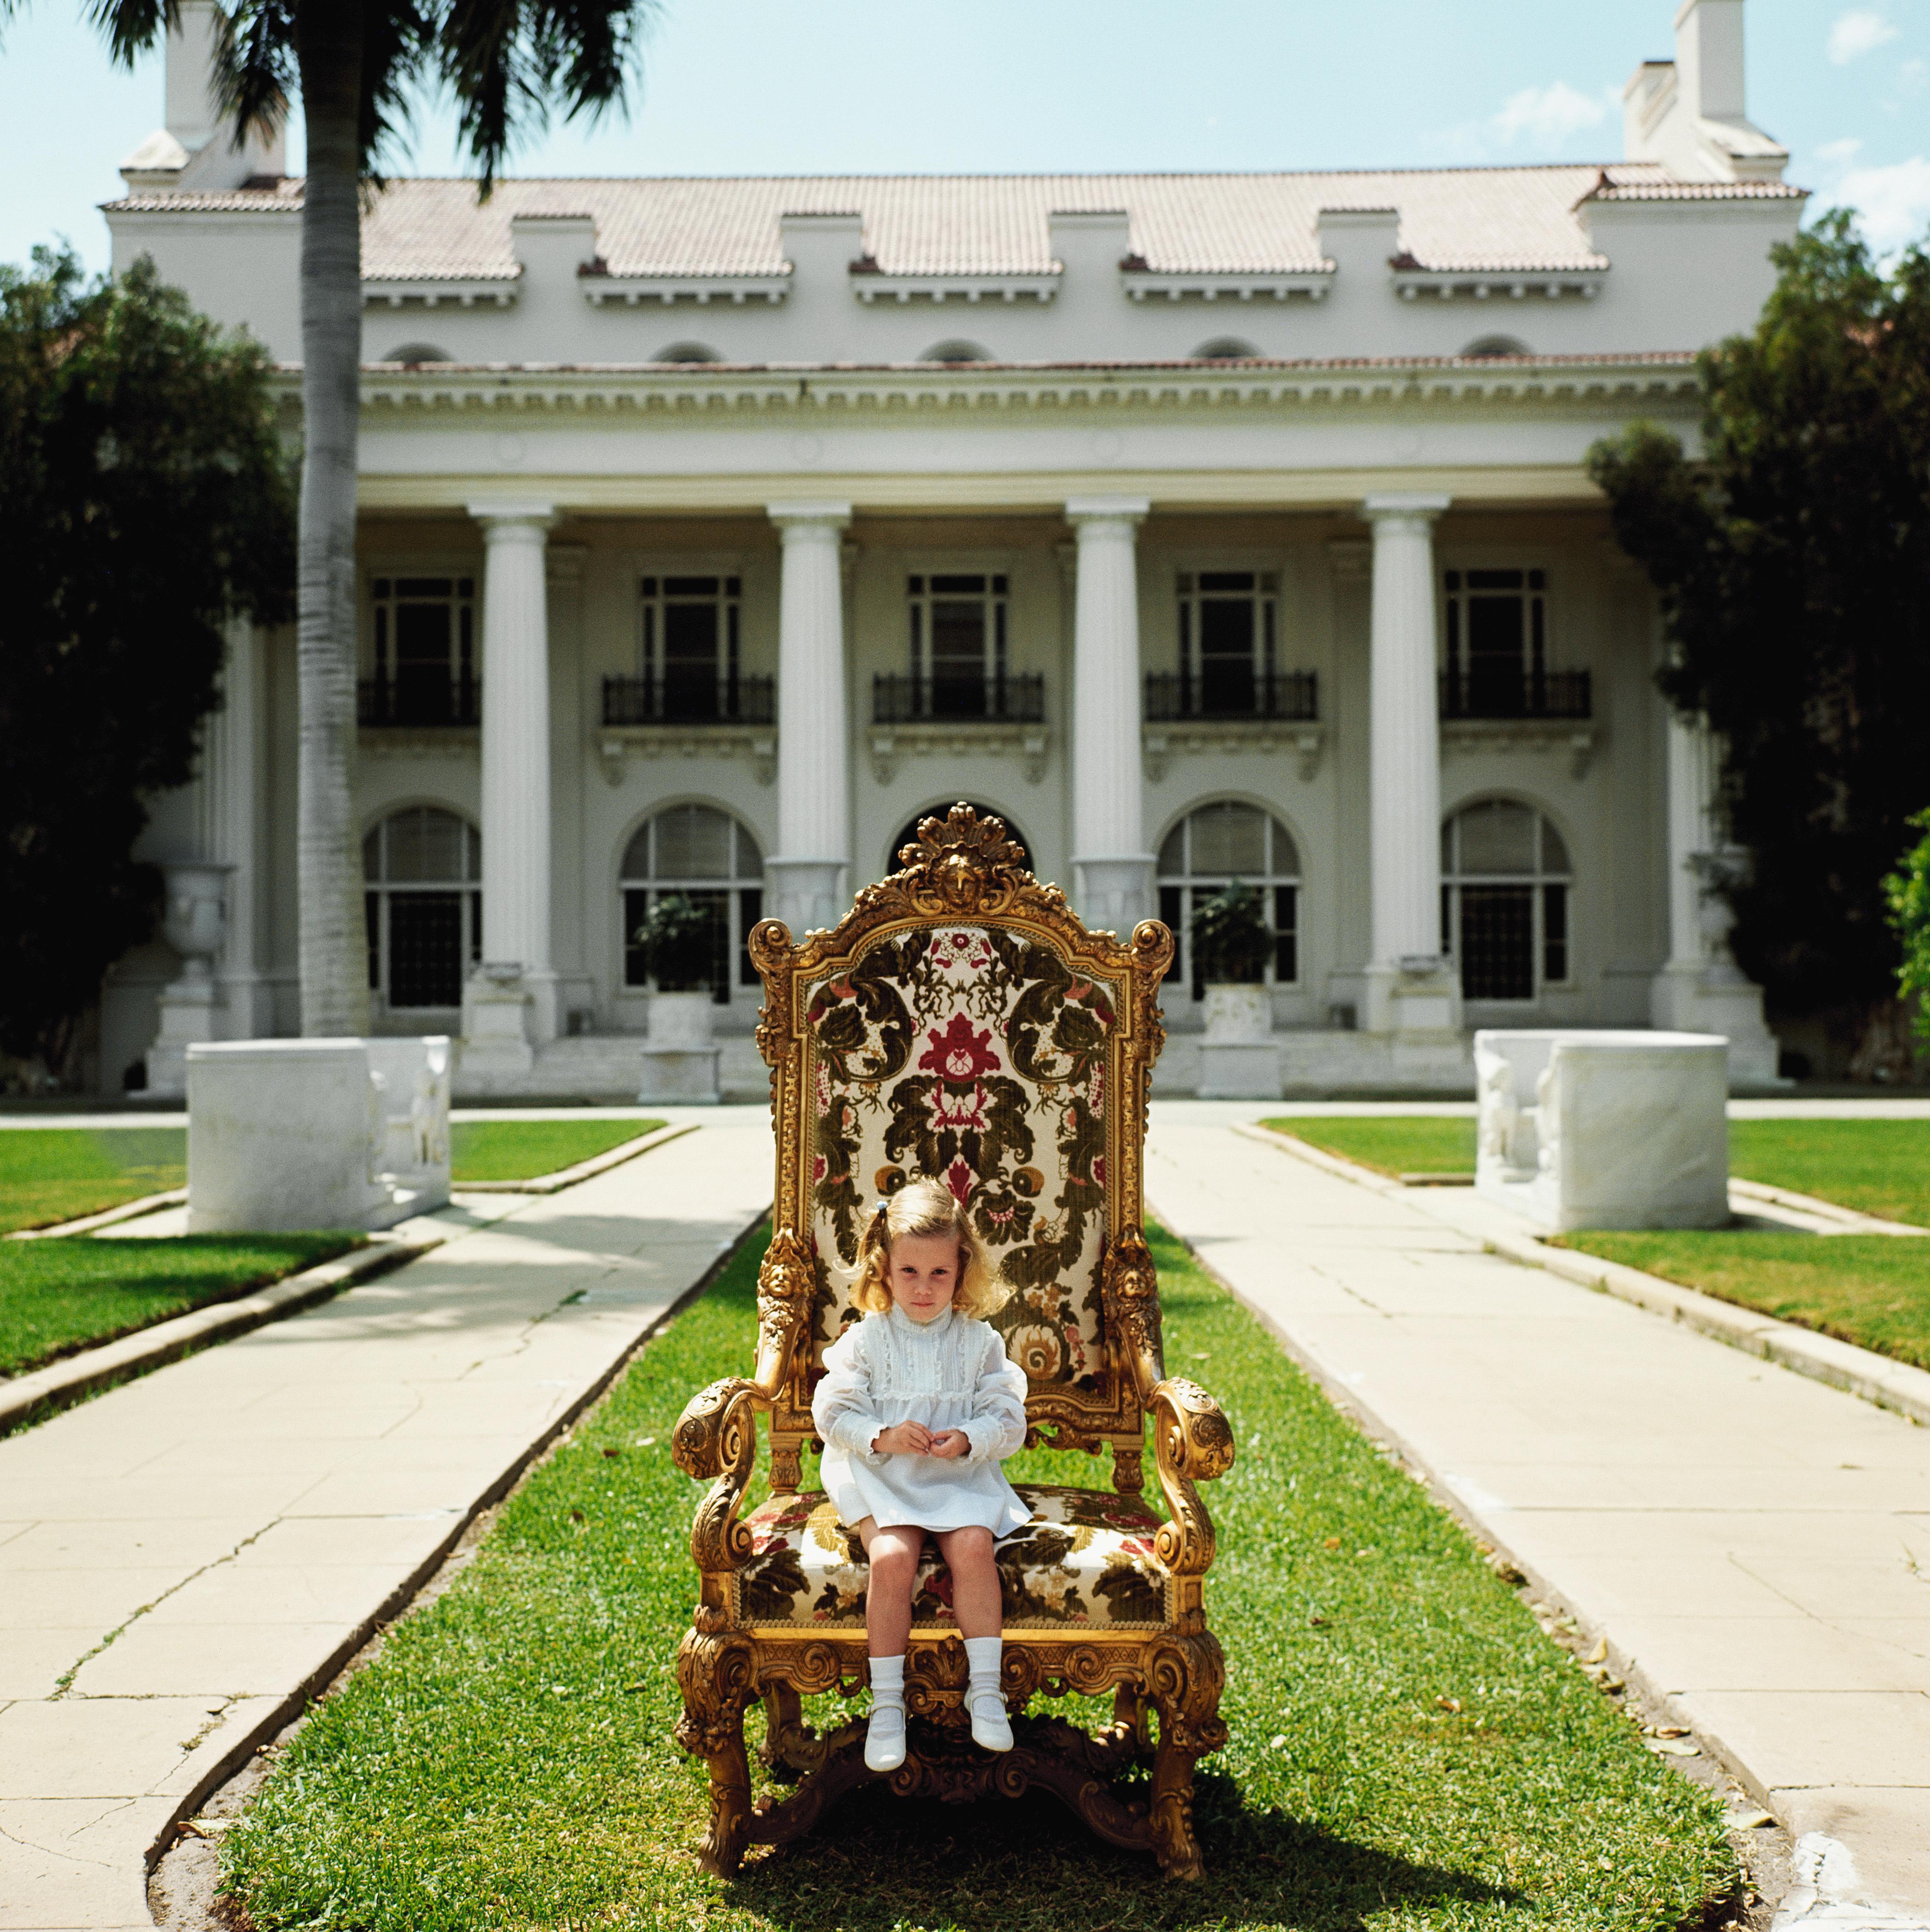 Elizabeth Matthews, descendant of H M Flagler co-founder of Palm Beach, sits in her great-grandfather’s favourite chair in front of the family mansion now the Flagler Museum, Palm Beach, April 1968

Slim Aarons
Family Chair
Chromogenic Lambda